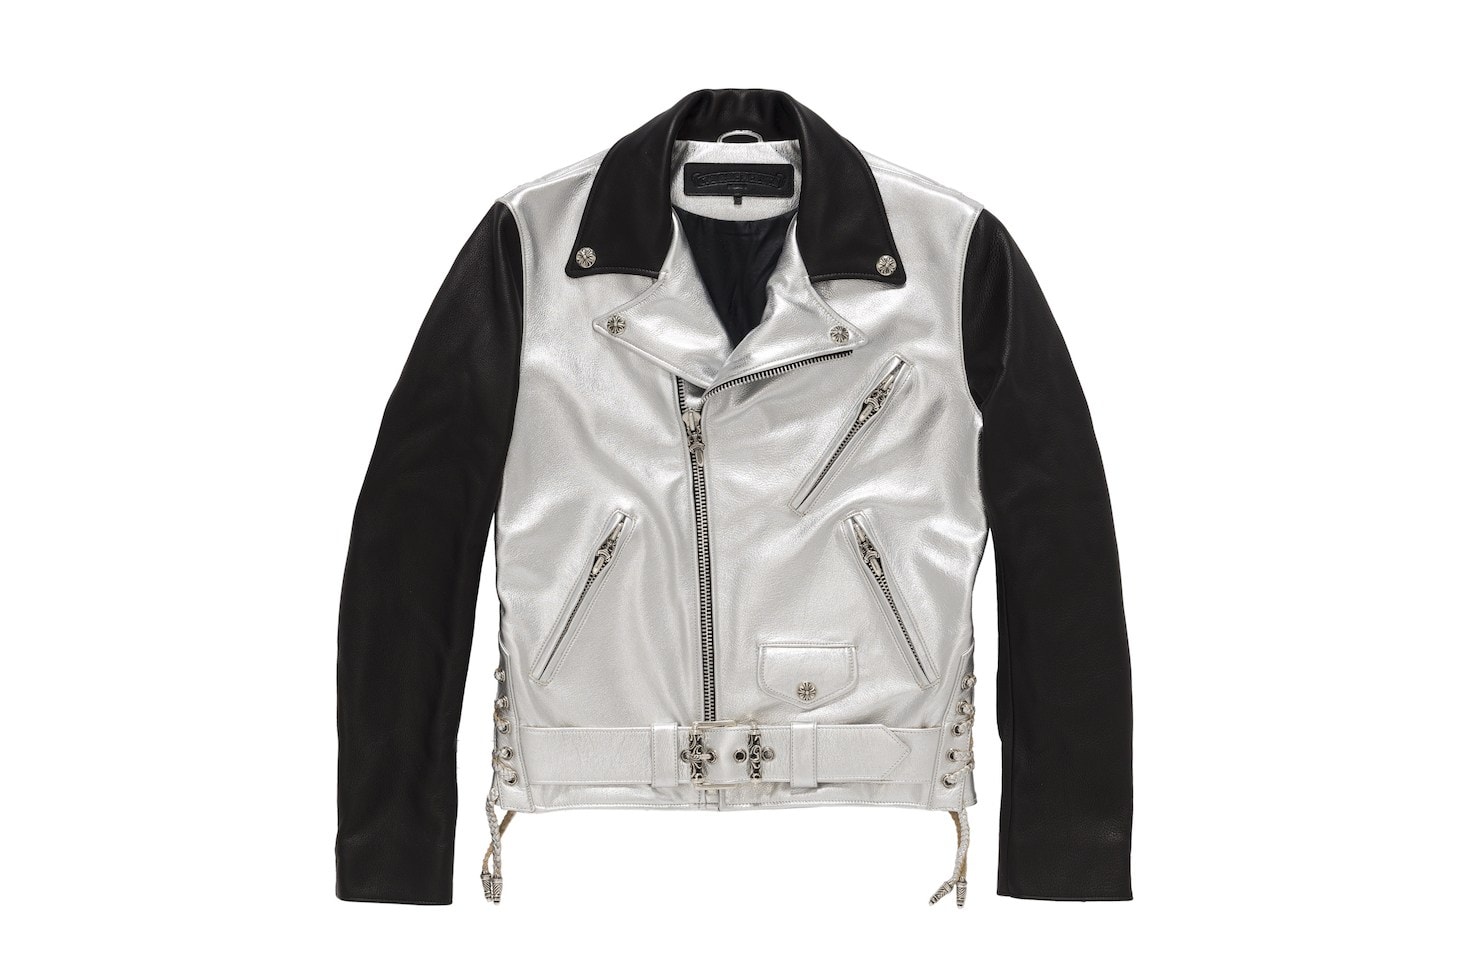 Chrome Hearts Dover Street Market Ginza Exclusive